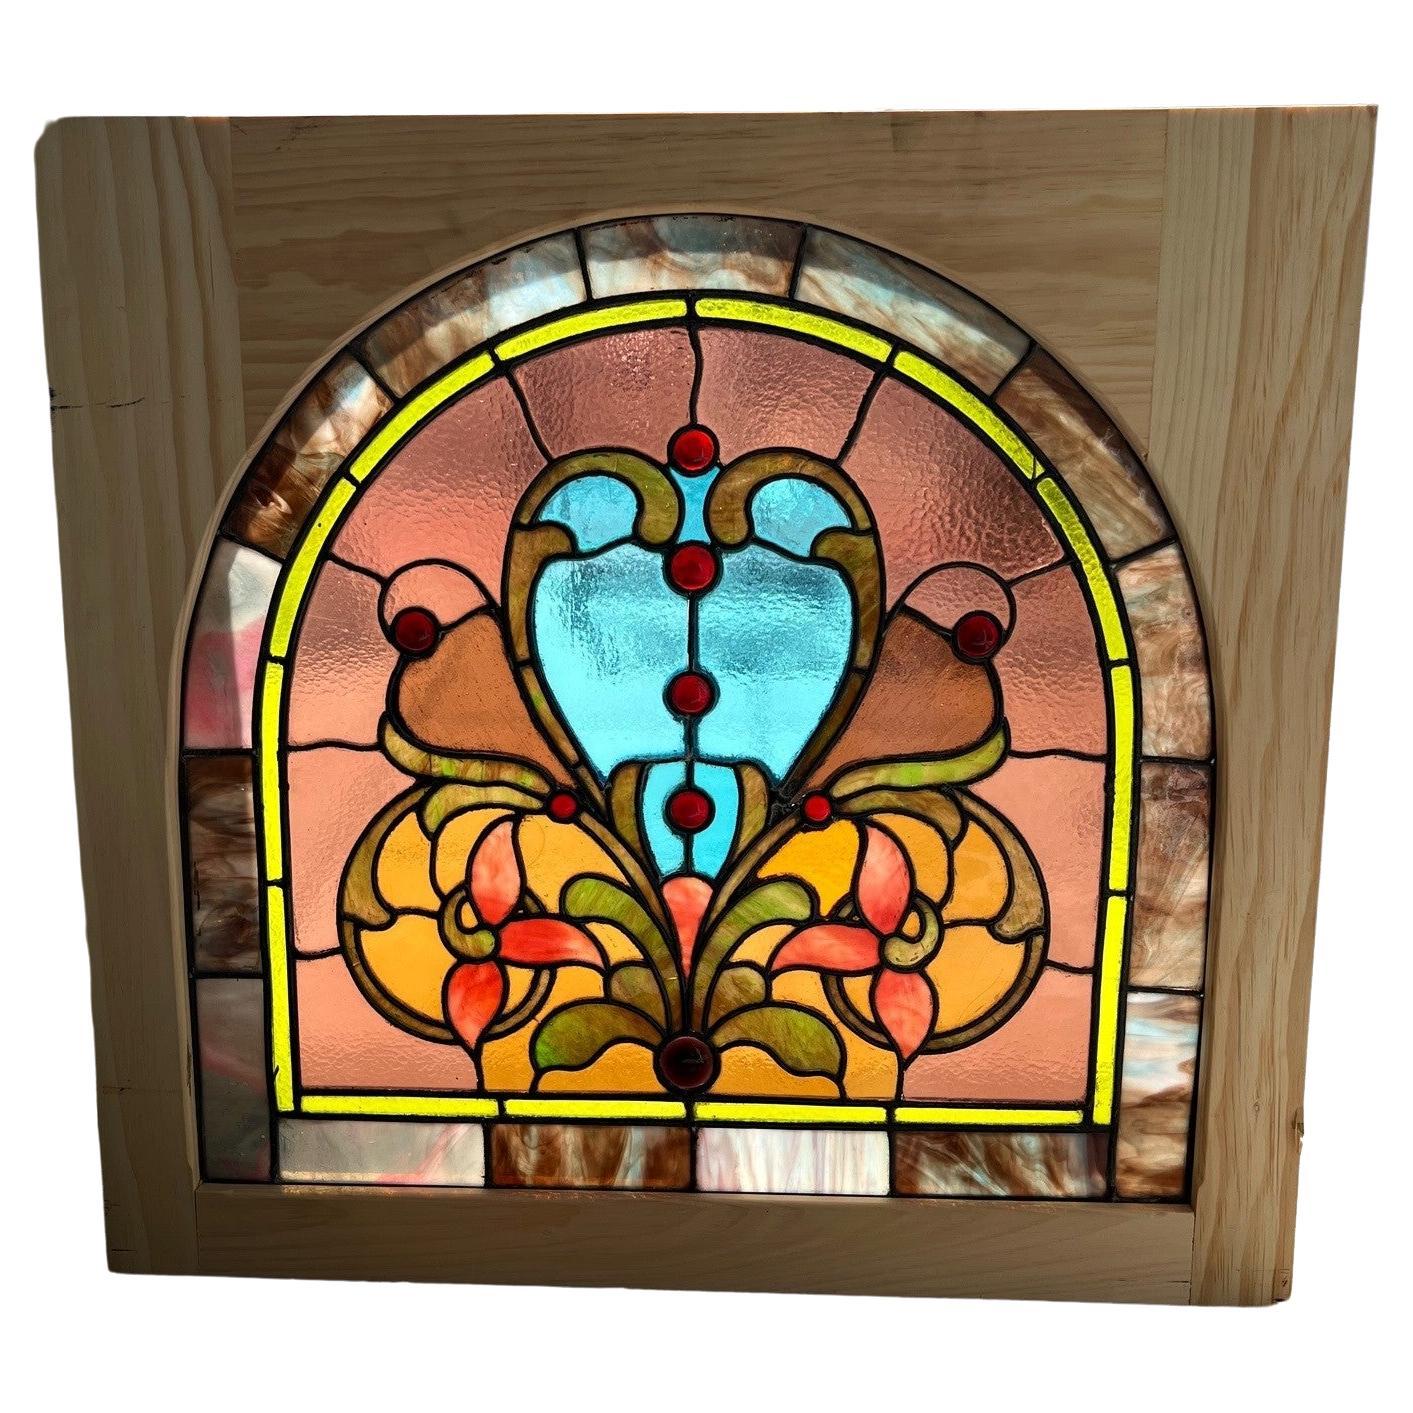 Late 19th Century Antique Arched Stained Glass Window in a New Wood Frame